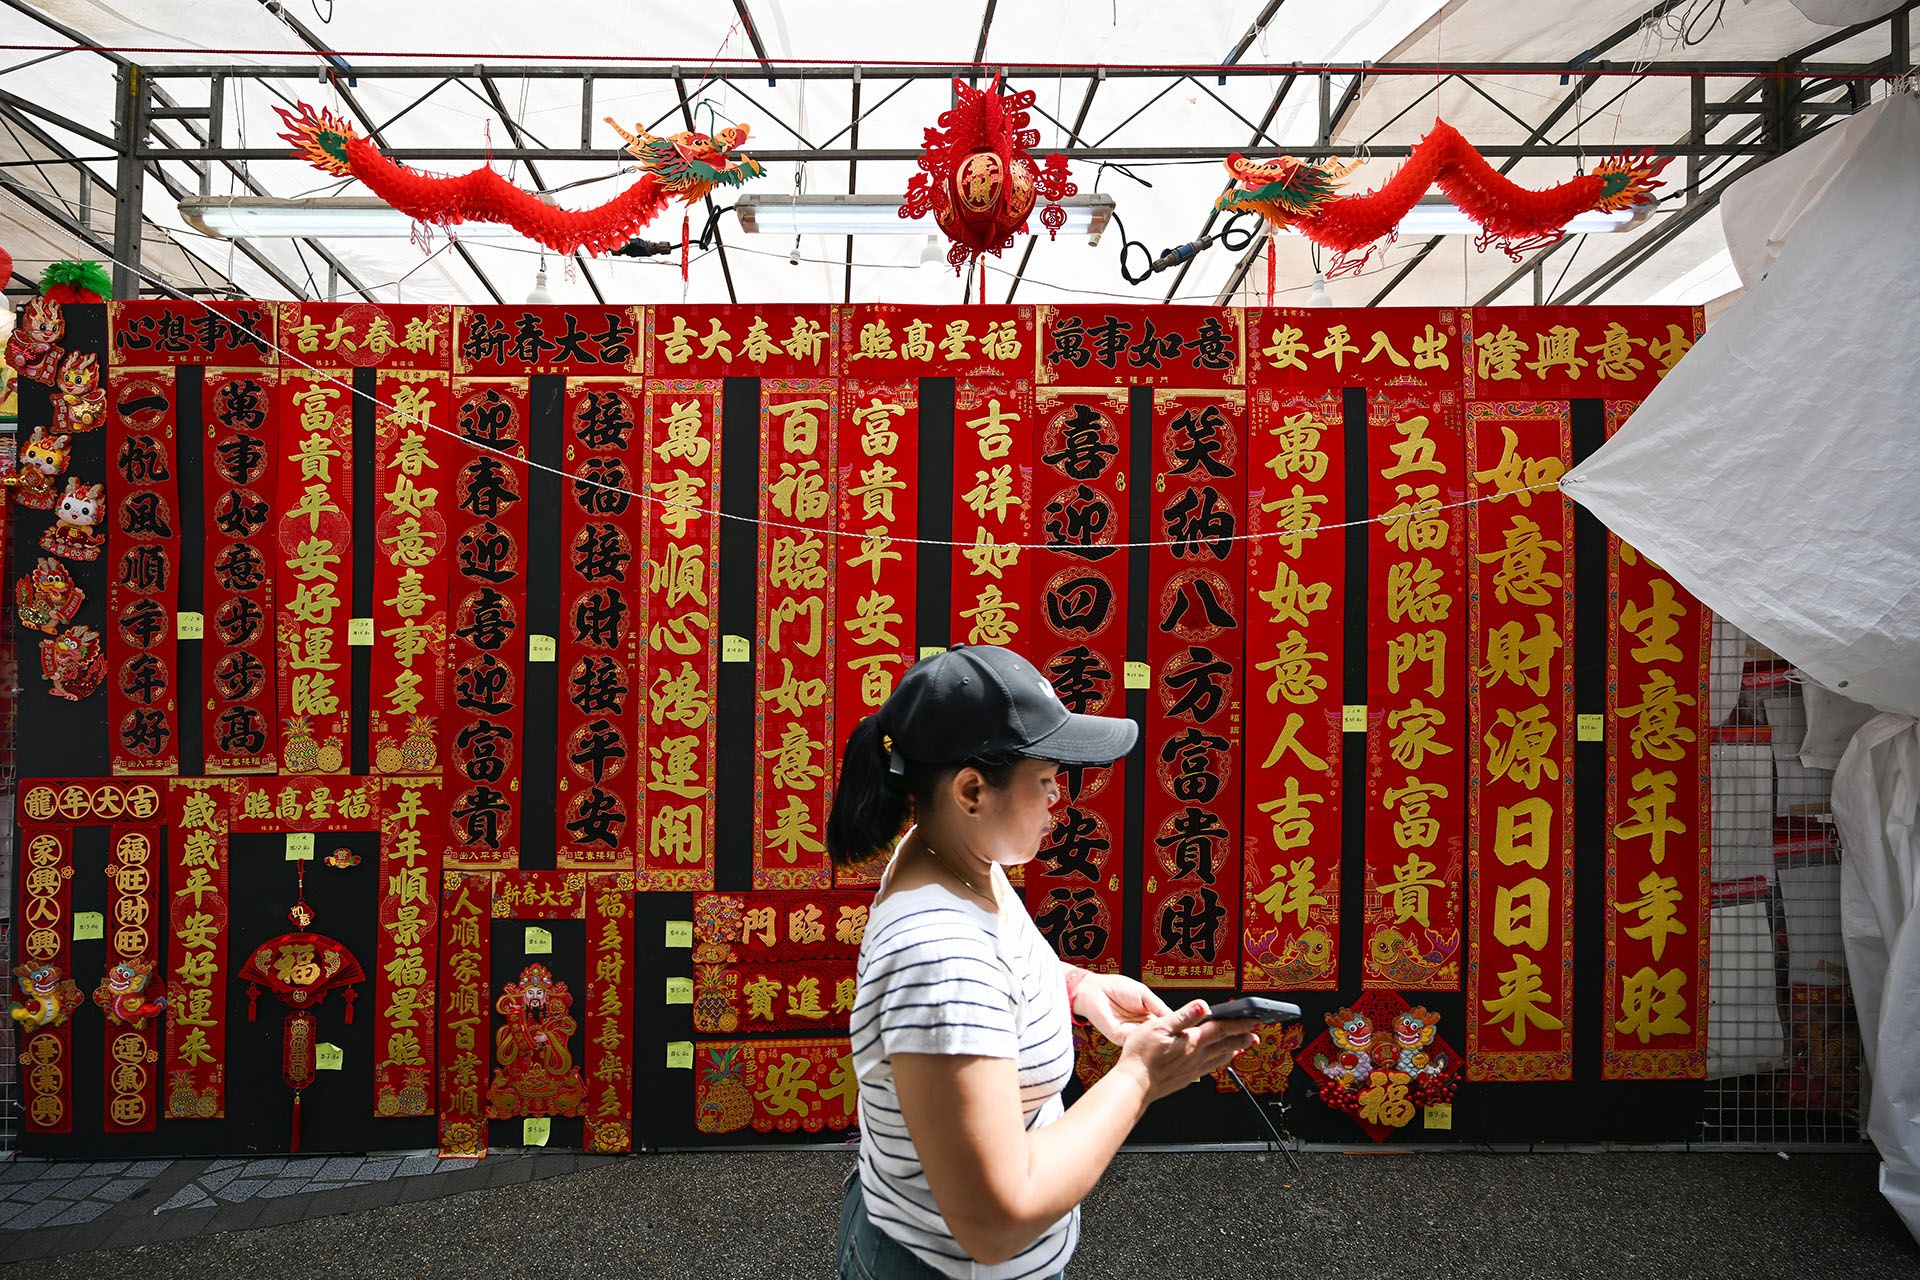 Chinese New Year couplets and lanterns at a stall next to Marine Parade Central Market & Food Centre. ST PHOTO: LIM YAOHUI